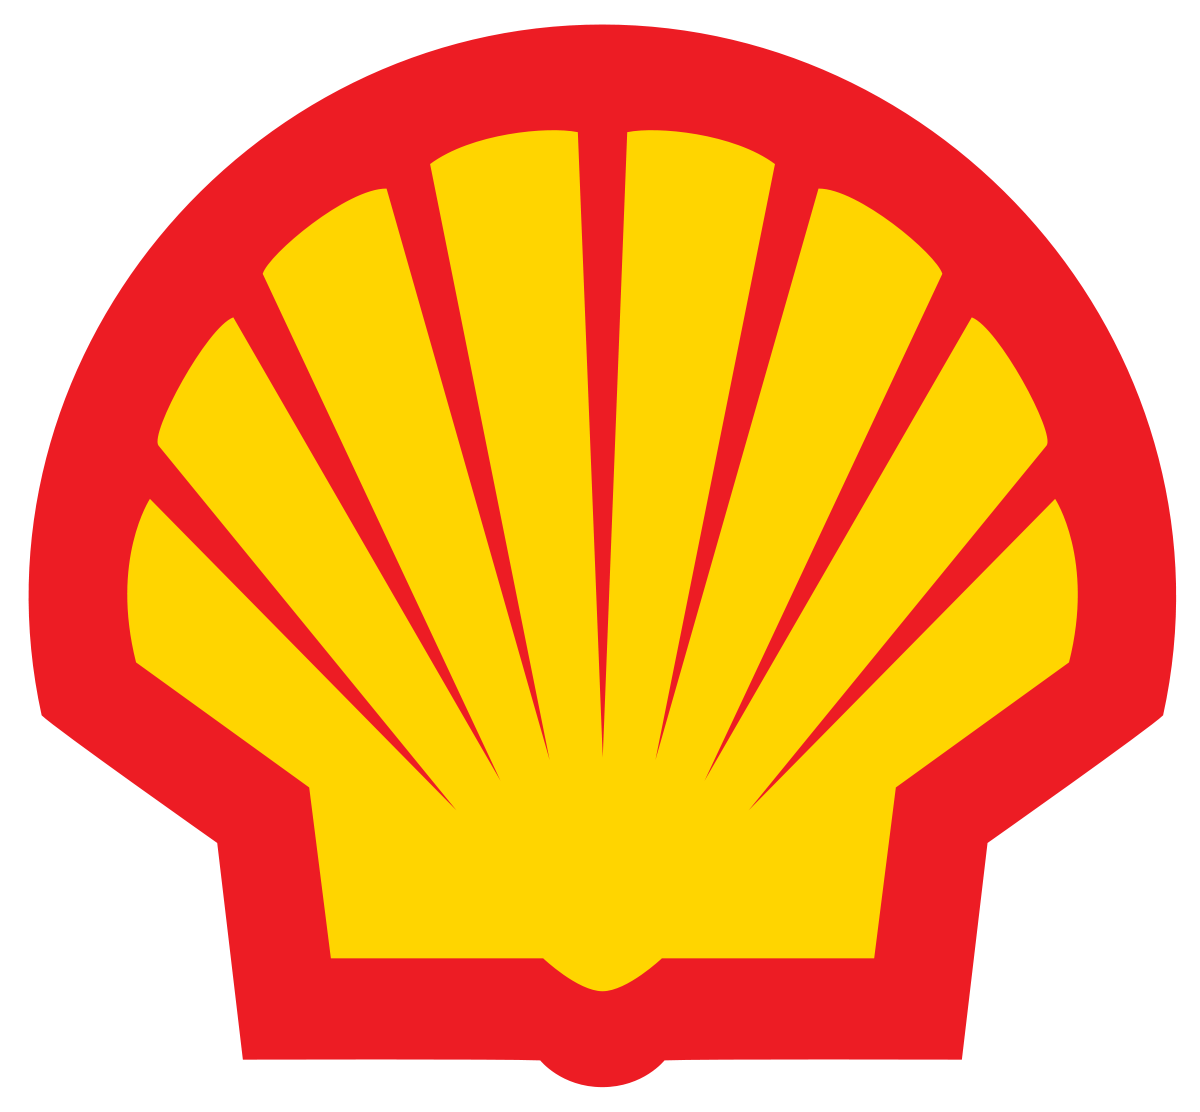 Gas Station Companies Logo - Shell Oil to Begin Installing Fast EV Charging Stations at its Gas